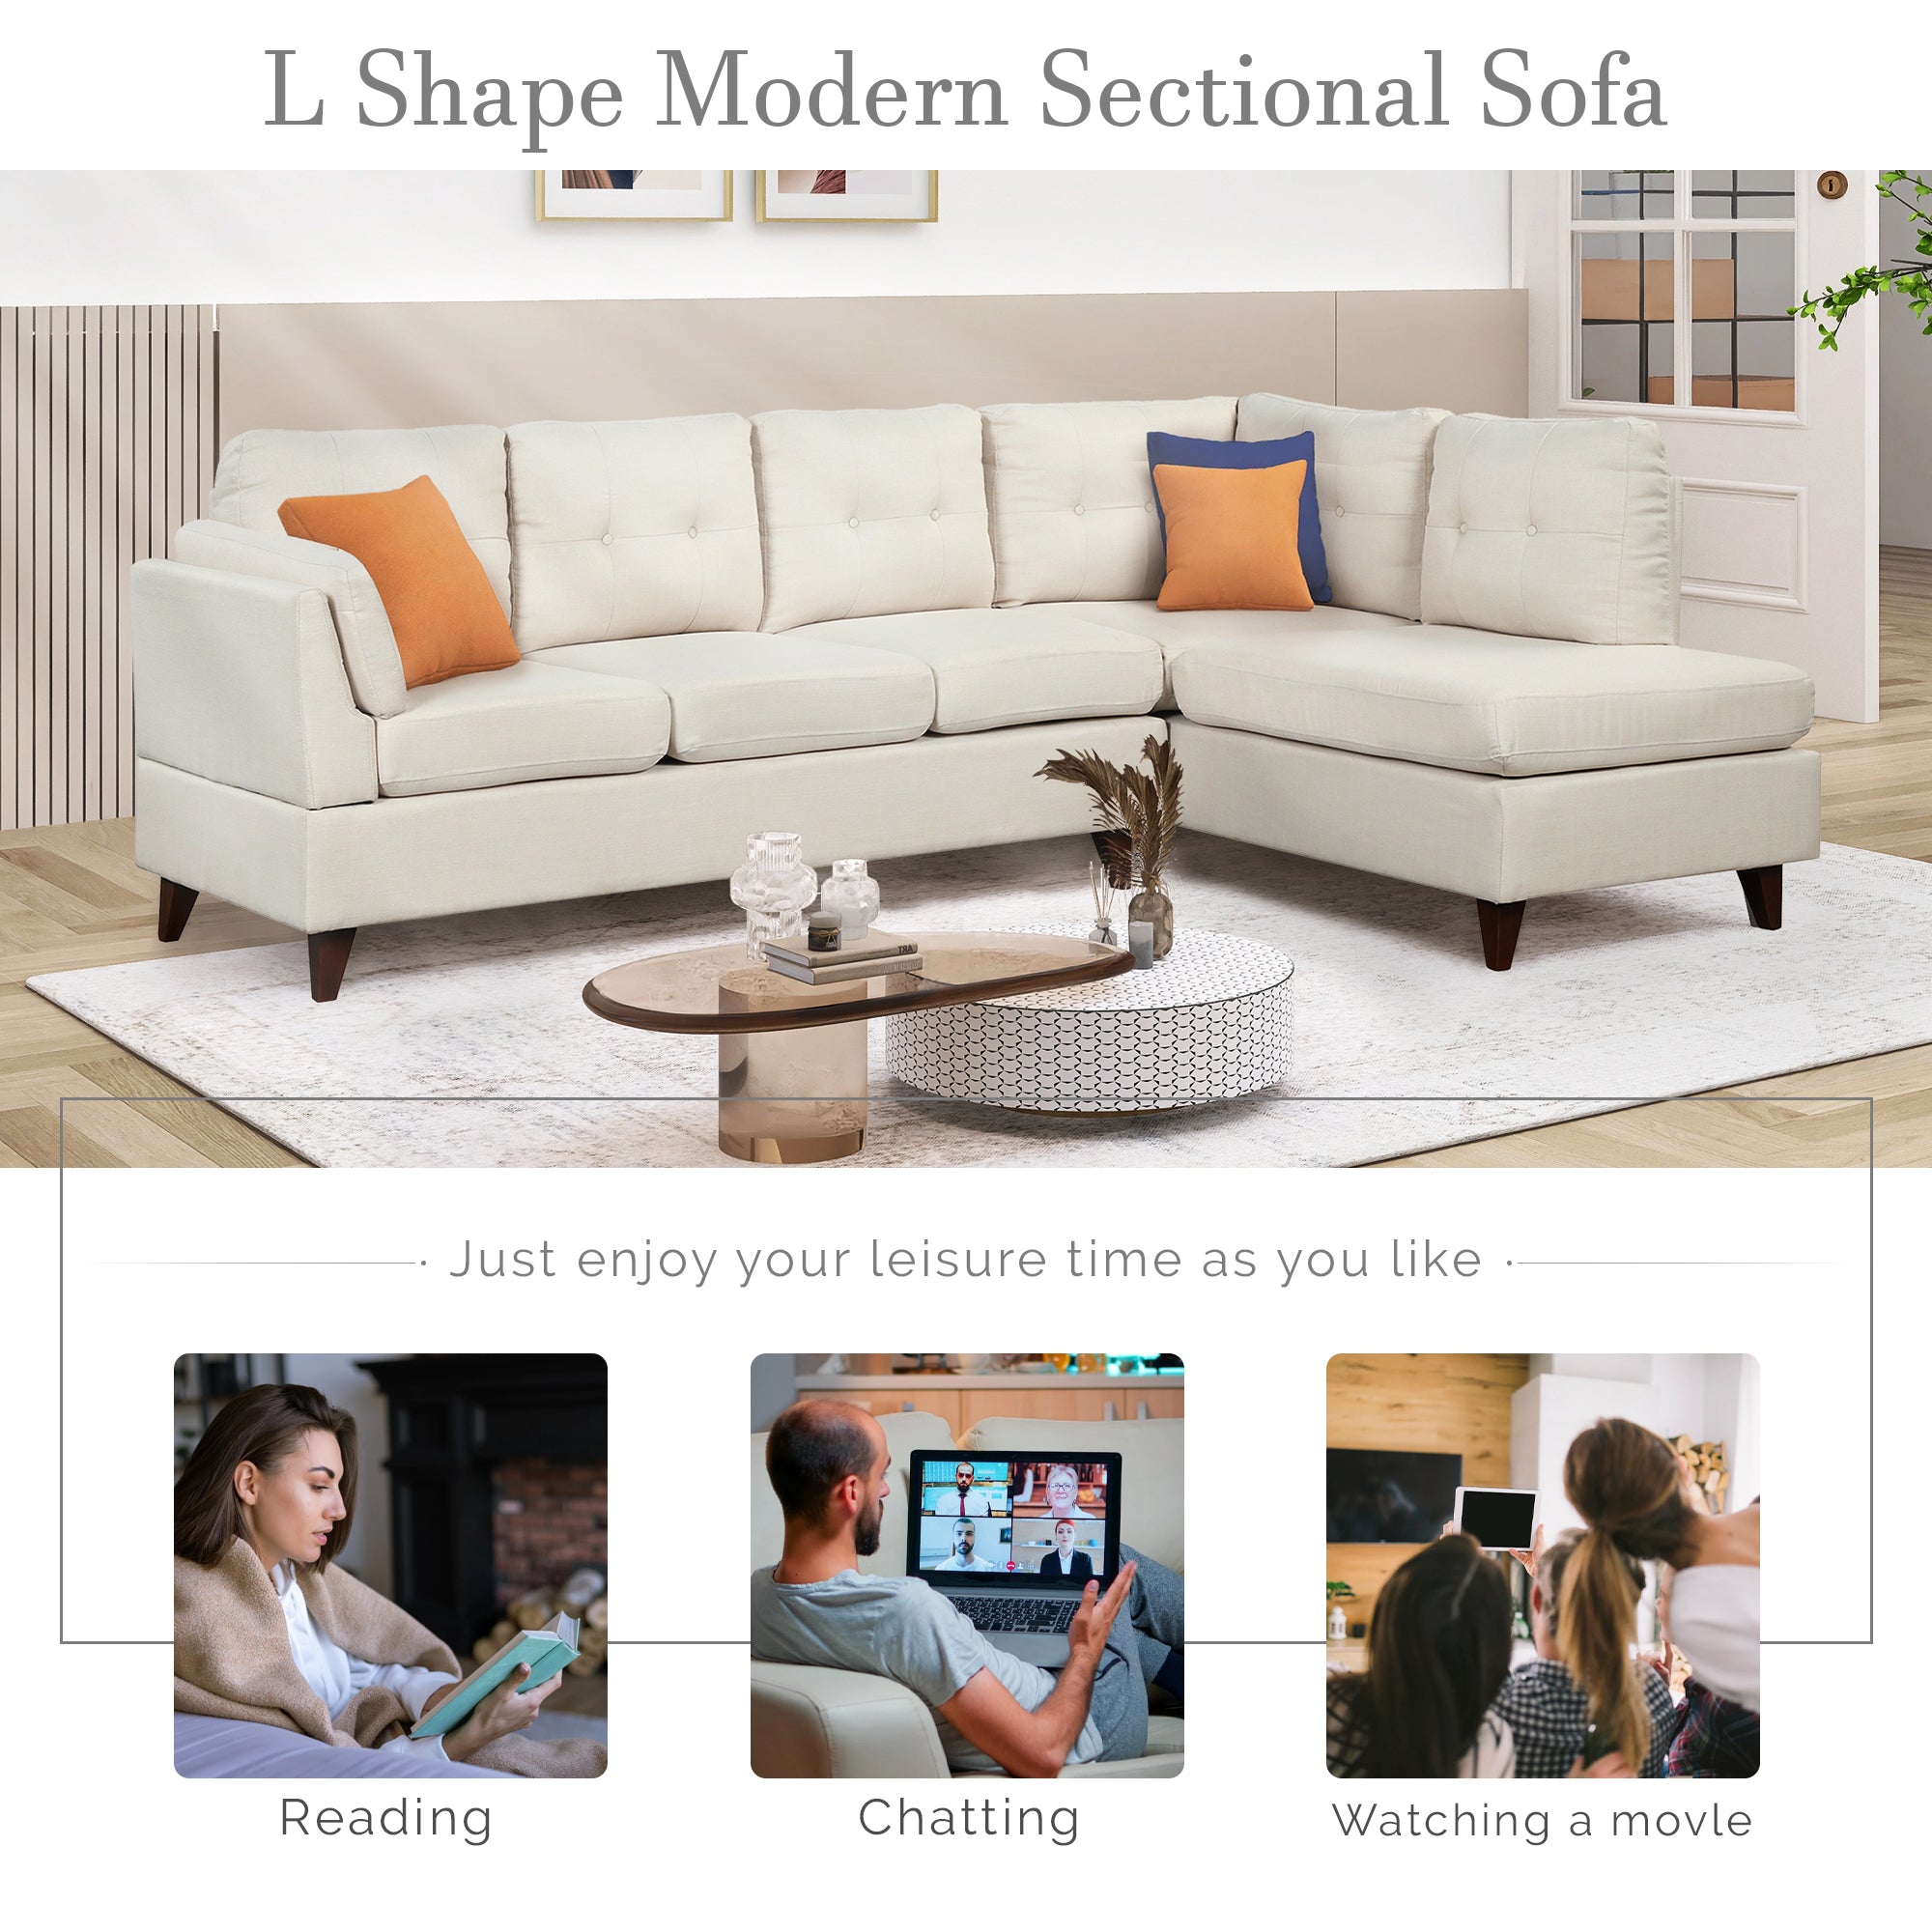 97.2" Modern Linen Fabric Sofa, L-Shape Couch with Chaise Lounge